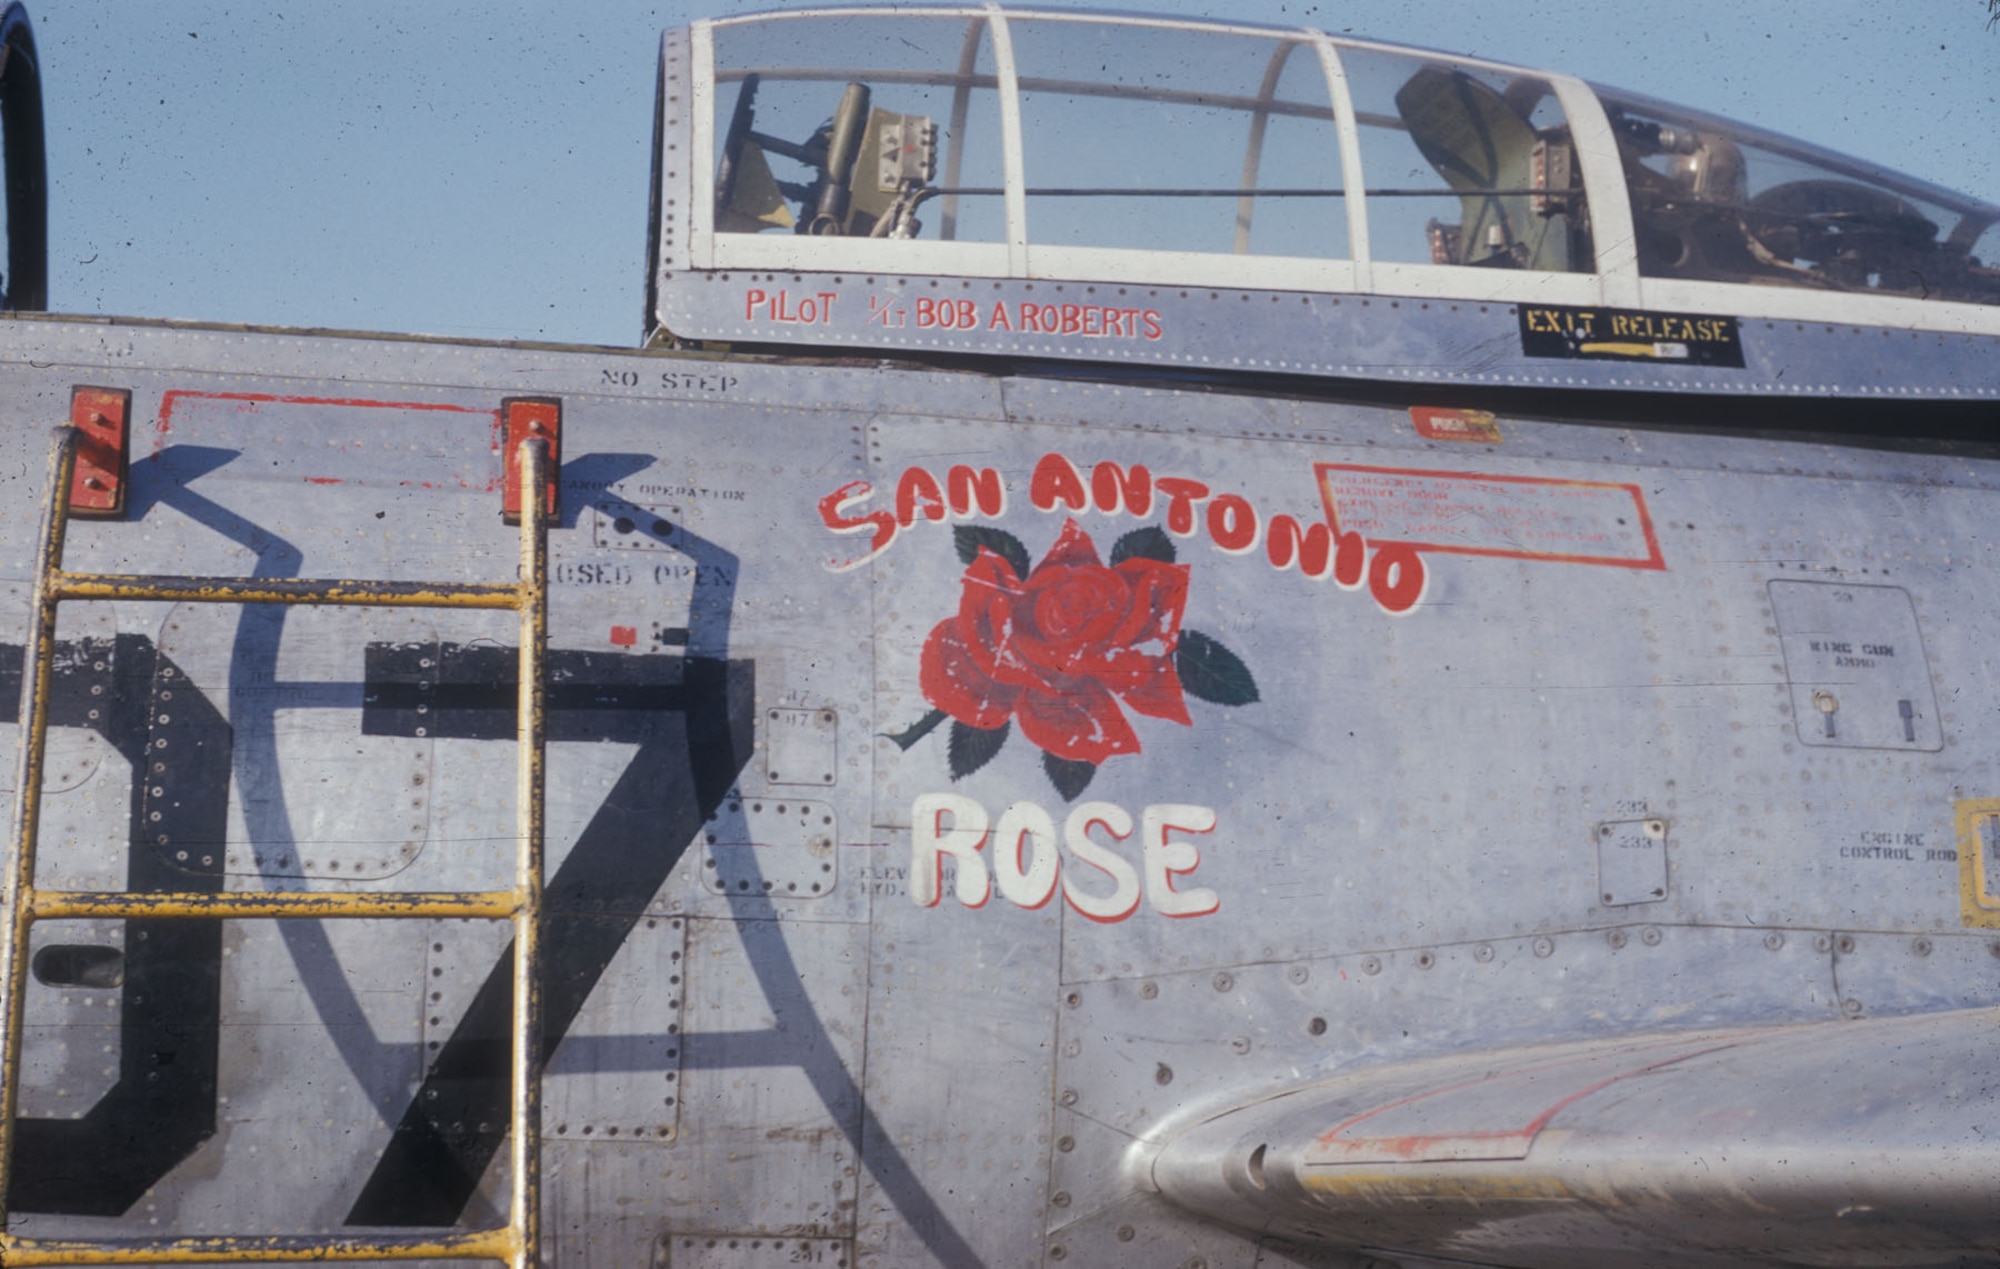 B-26 and F-84s, like other USAF aircraft in Korea, often had nose art. (U.S. Air Force photo)